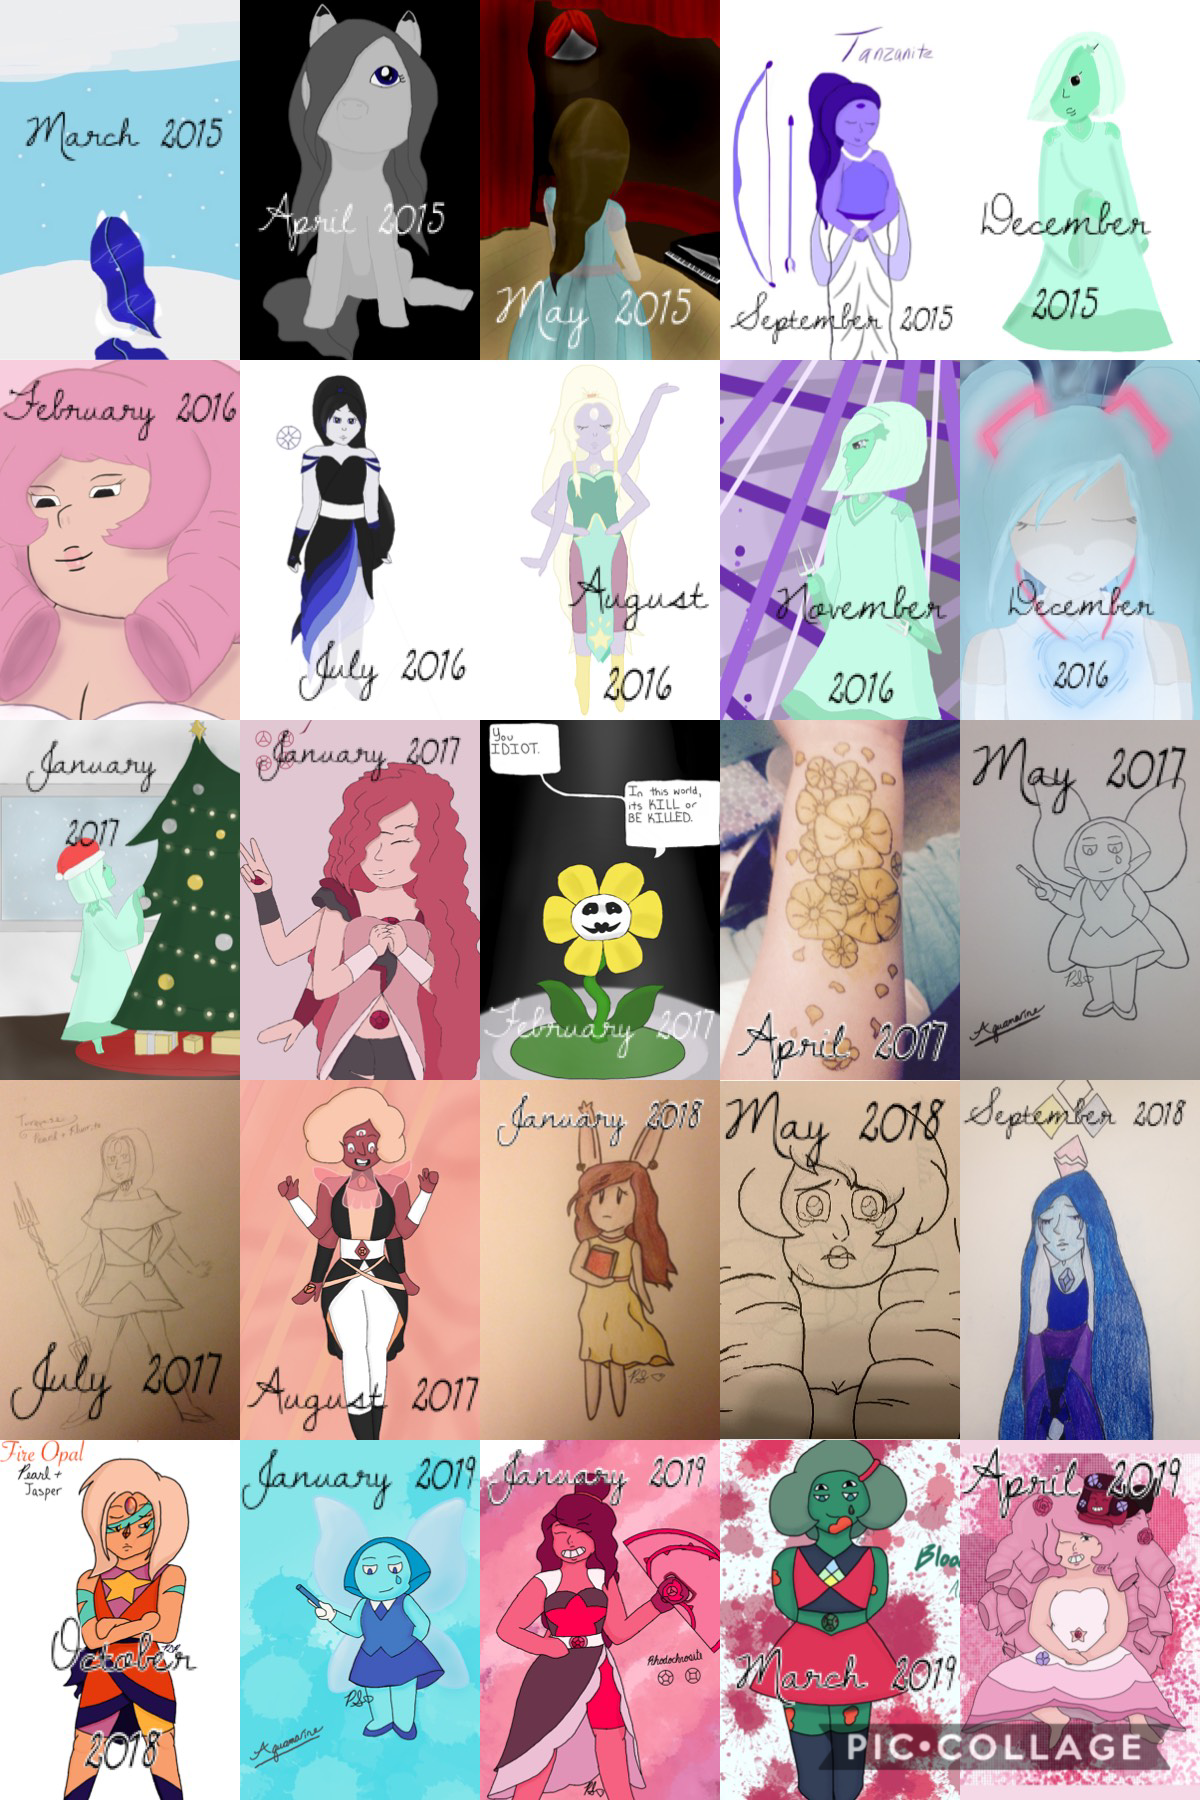 Art progress! I’m actually really proud of how much I’ve grown over the past four years. 💕

Side note: Check out my most recent post and let me know what you think :)